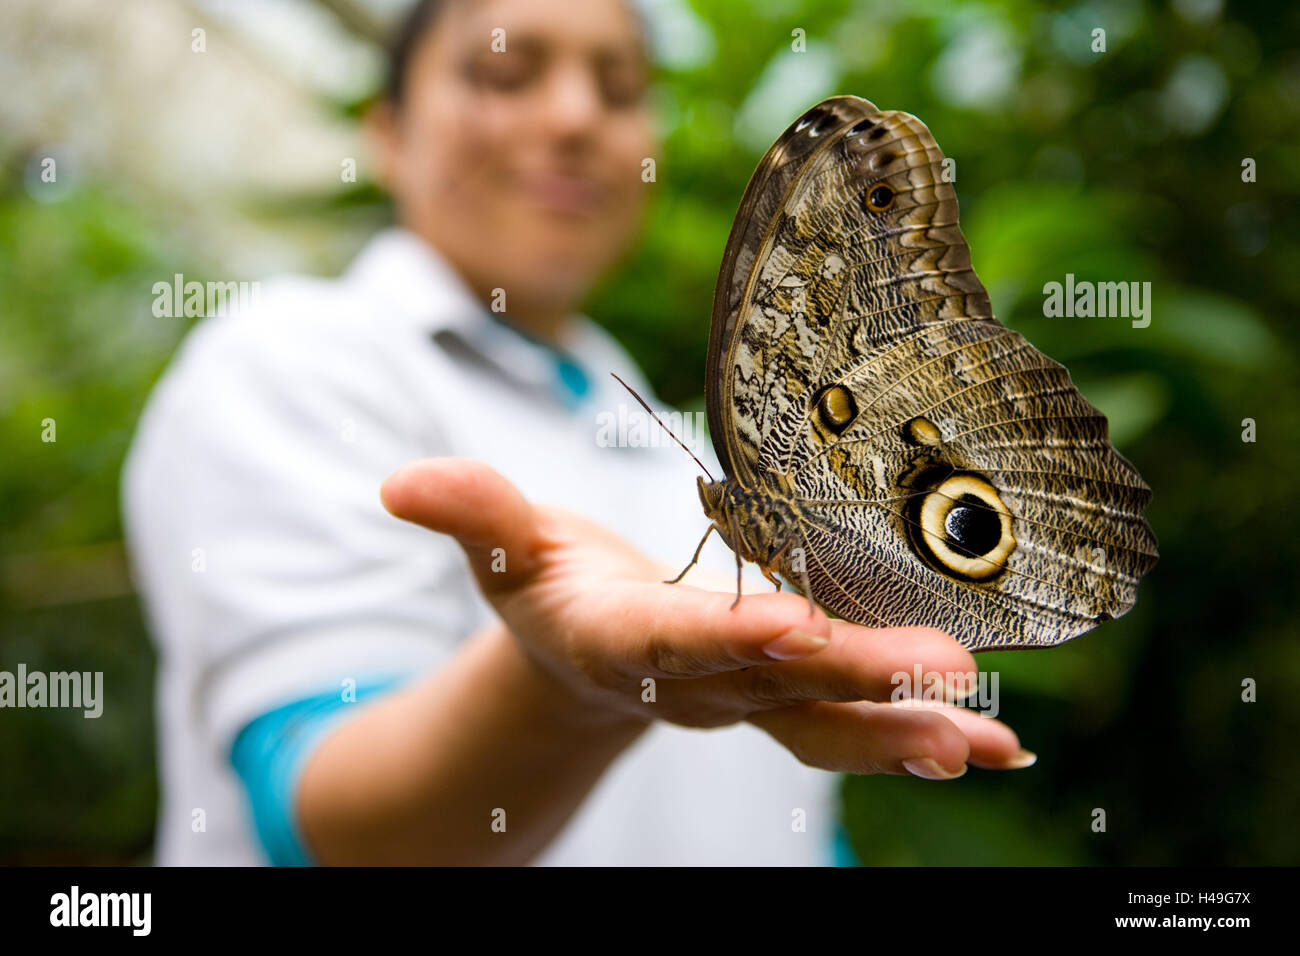 Woman, hand, banana butterfly, Caligo memnon, Ecuador, province Pichincha, forest nature reserve Mindo, Nambillo, South America, butterfly, largely, butterfly, noble butterfly, Nymphalidae, animal, insect, animal world, insects, flight insects, butterflies, butterflies, Sechsfüßler, neopteranses, Stock Photo